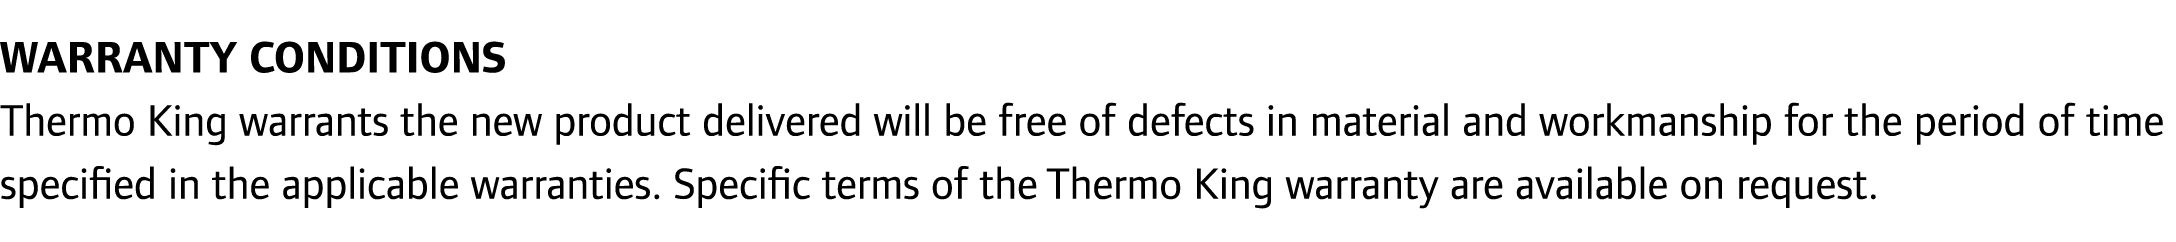 WARRANTY CONDITIONS Thermo King warrants the new product delivered will be free of defects in material and workmanshi...